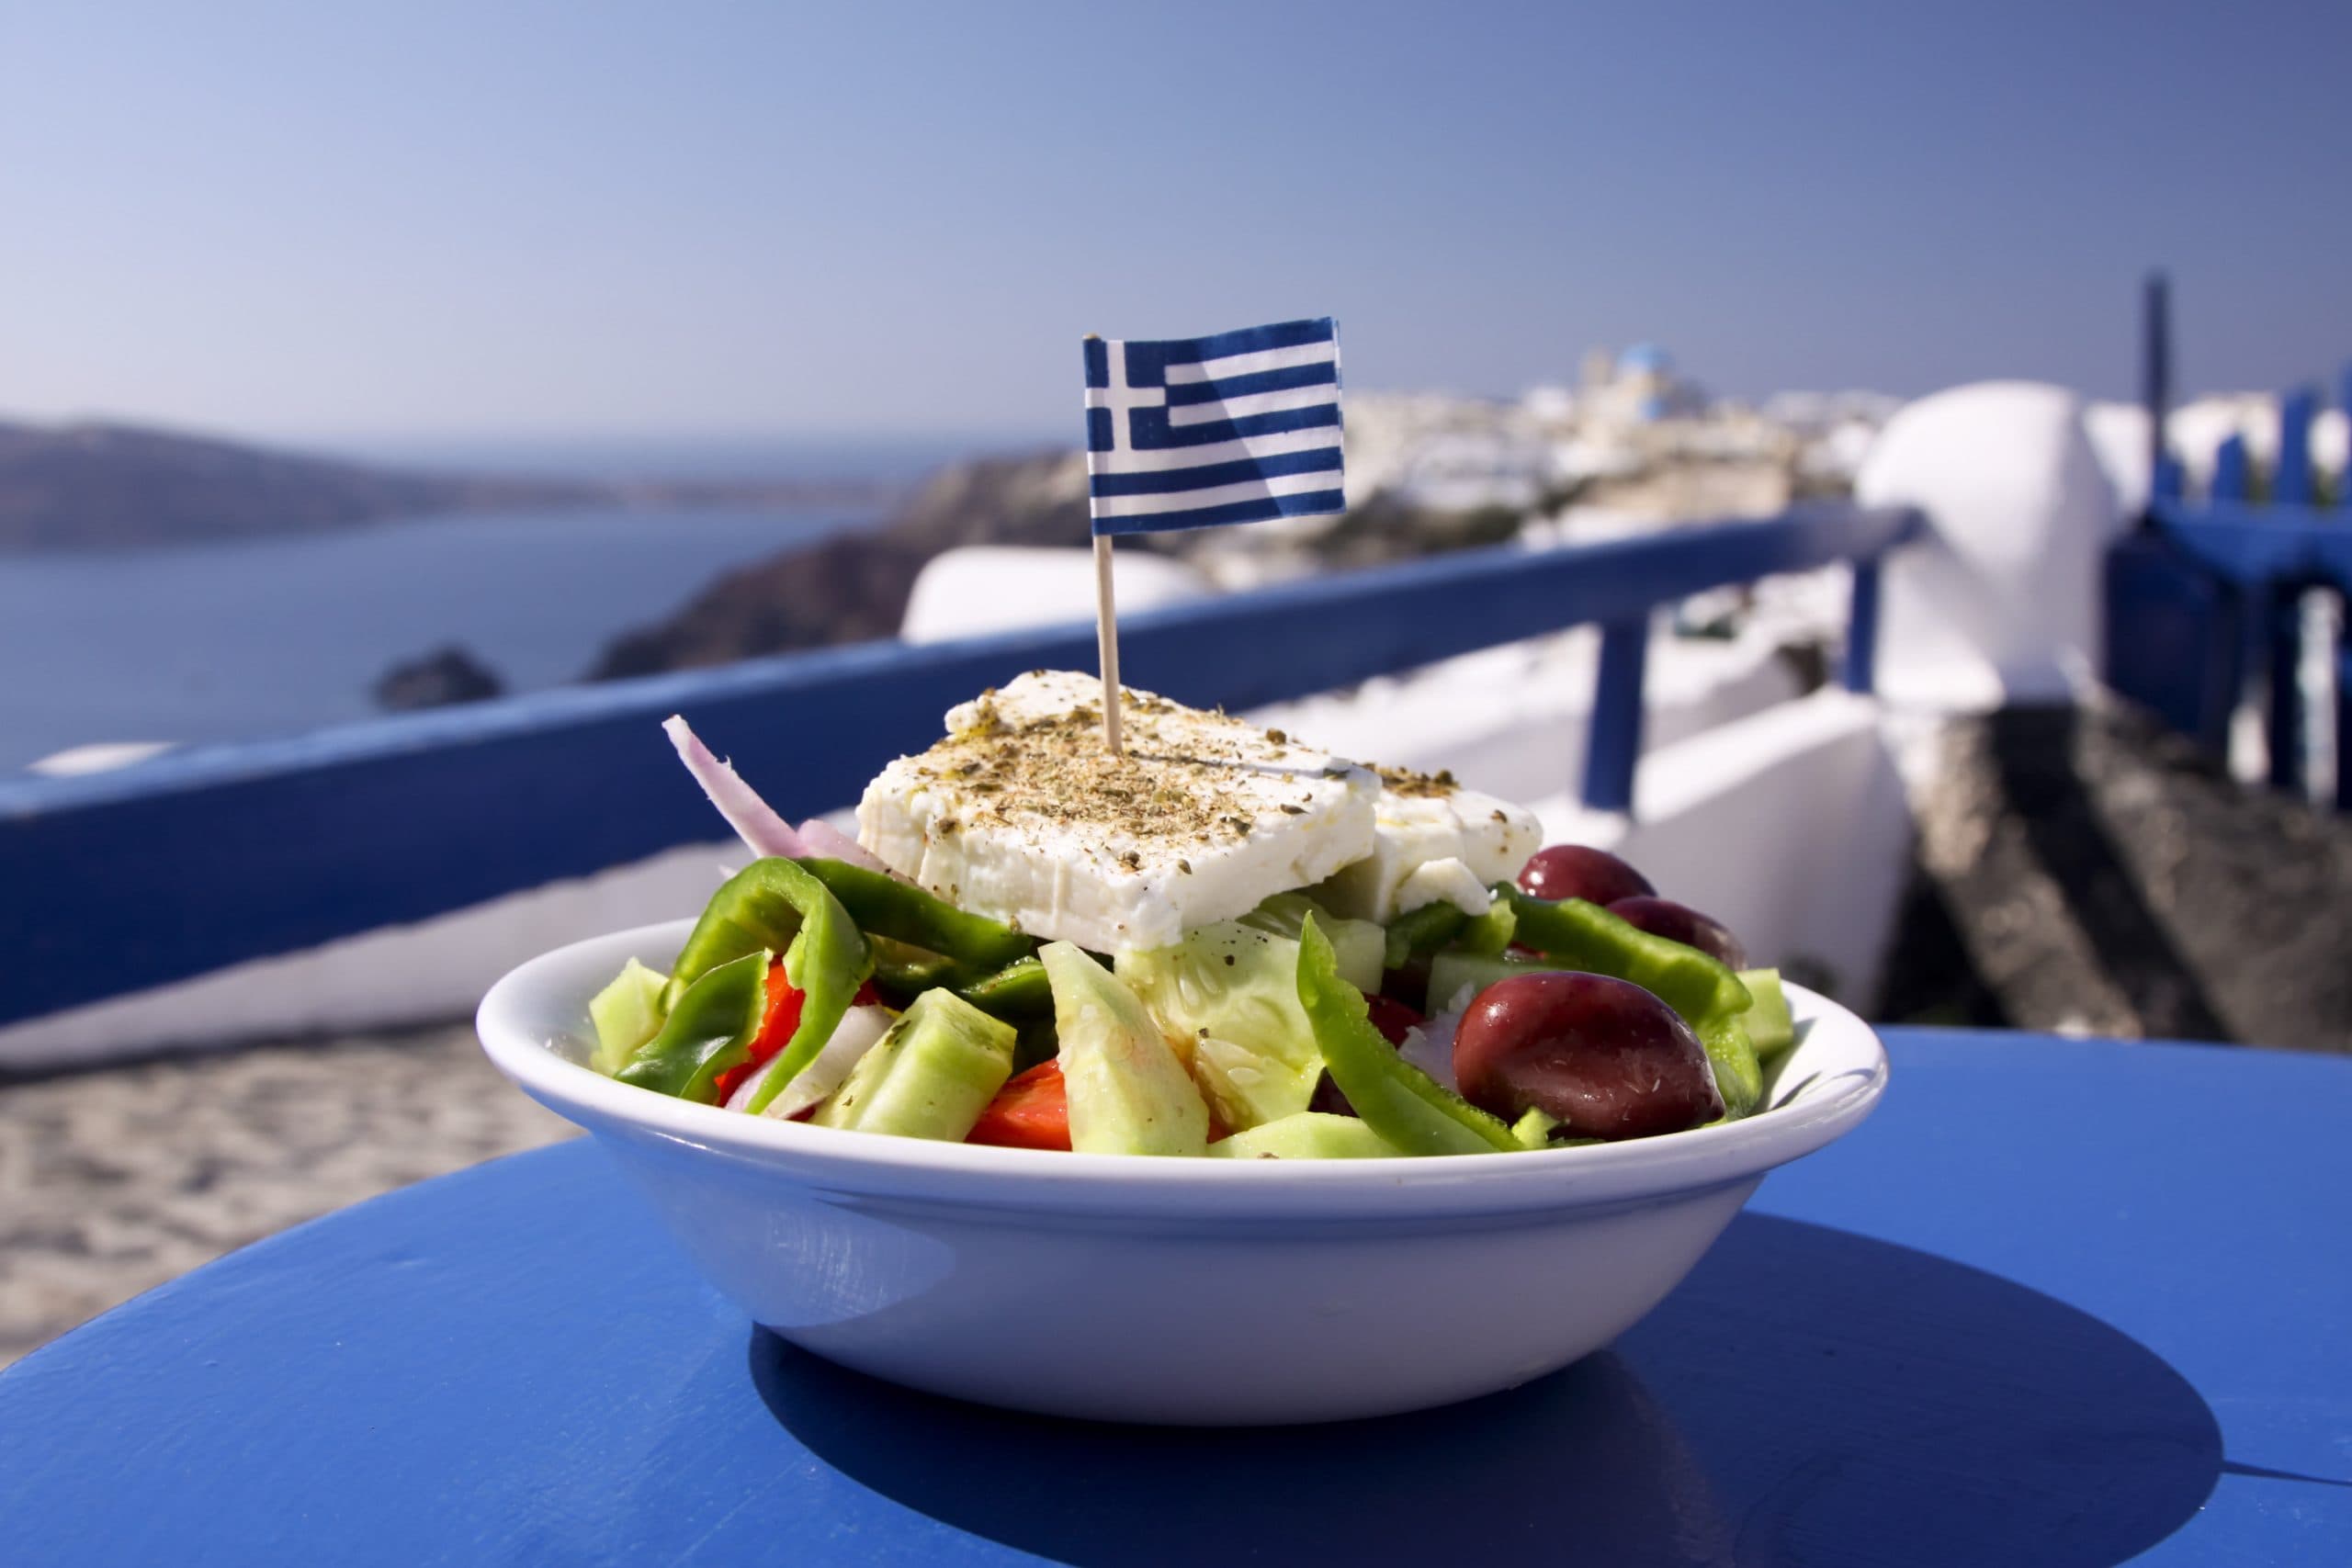 A perfect Greek salad, incorporating olives, green peppers and feta cheese, topped with a Greek flag, in Oia, Santorini